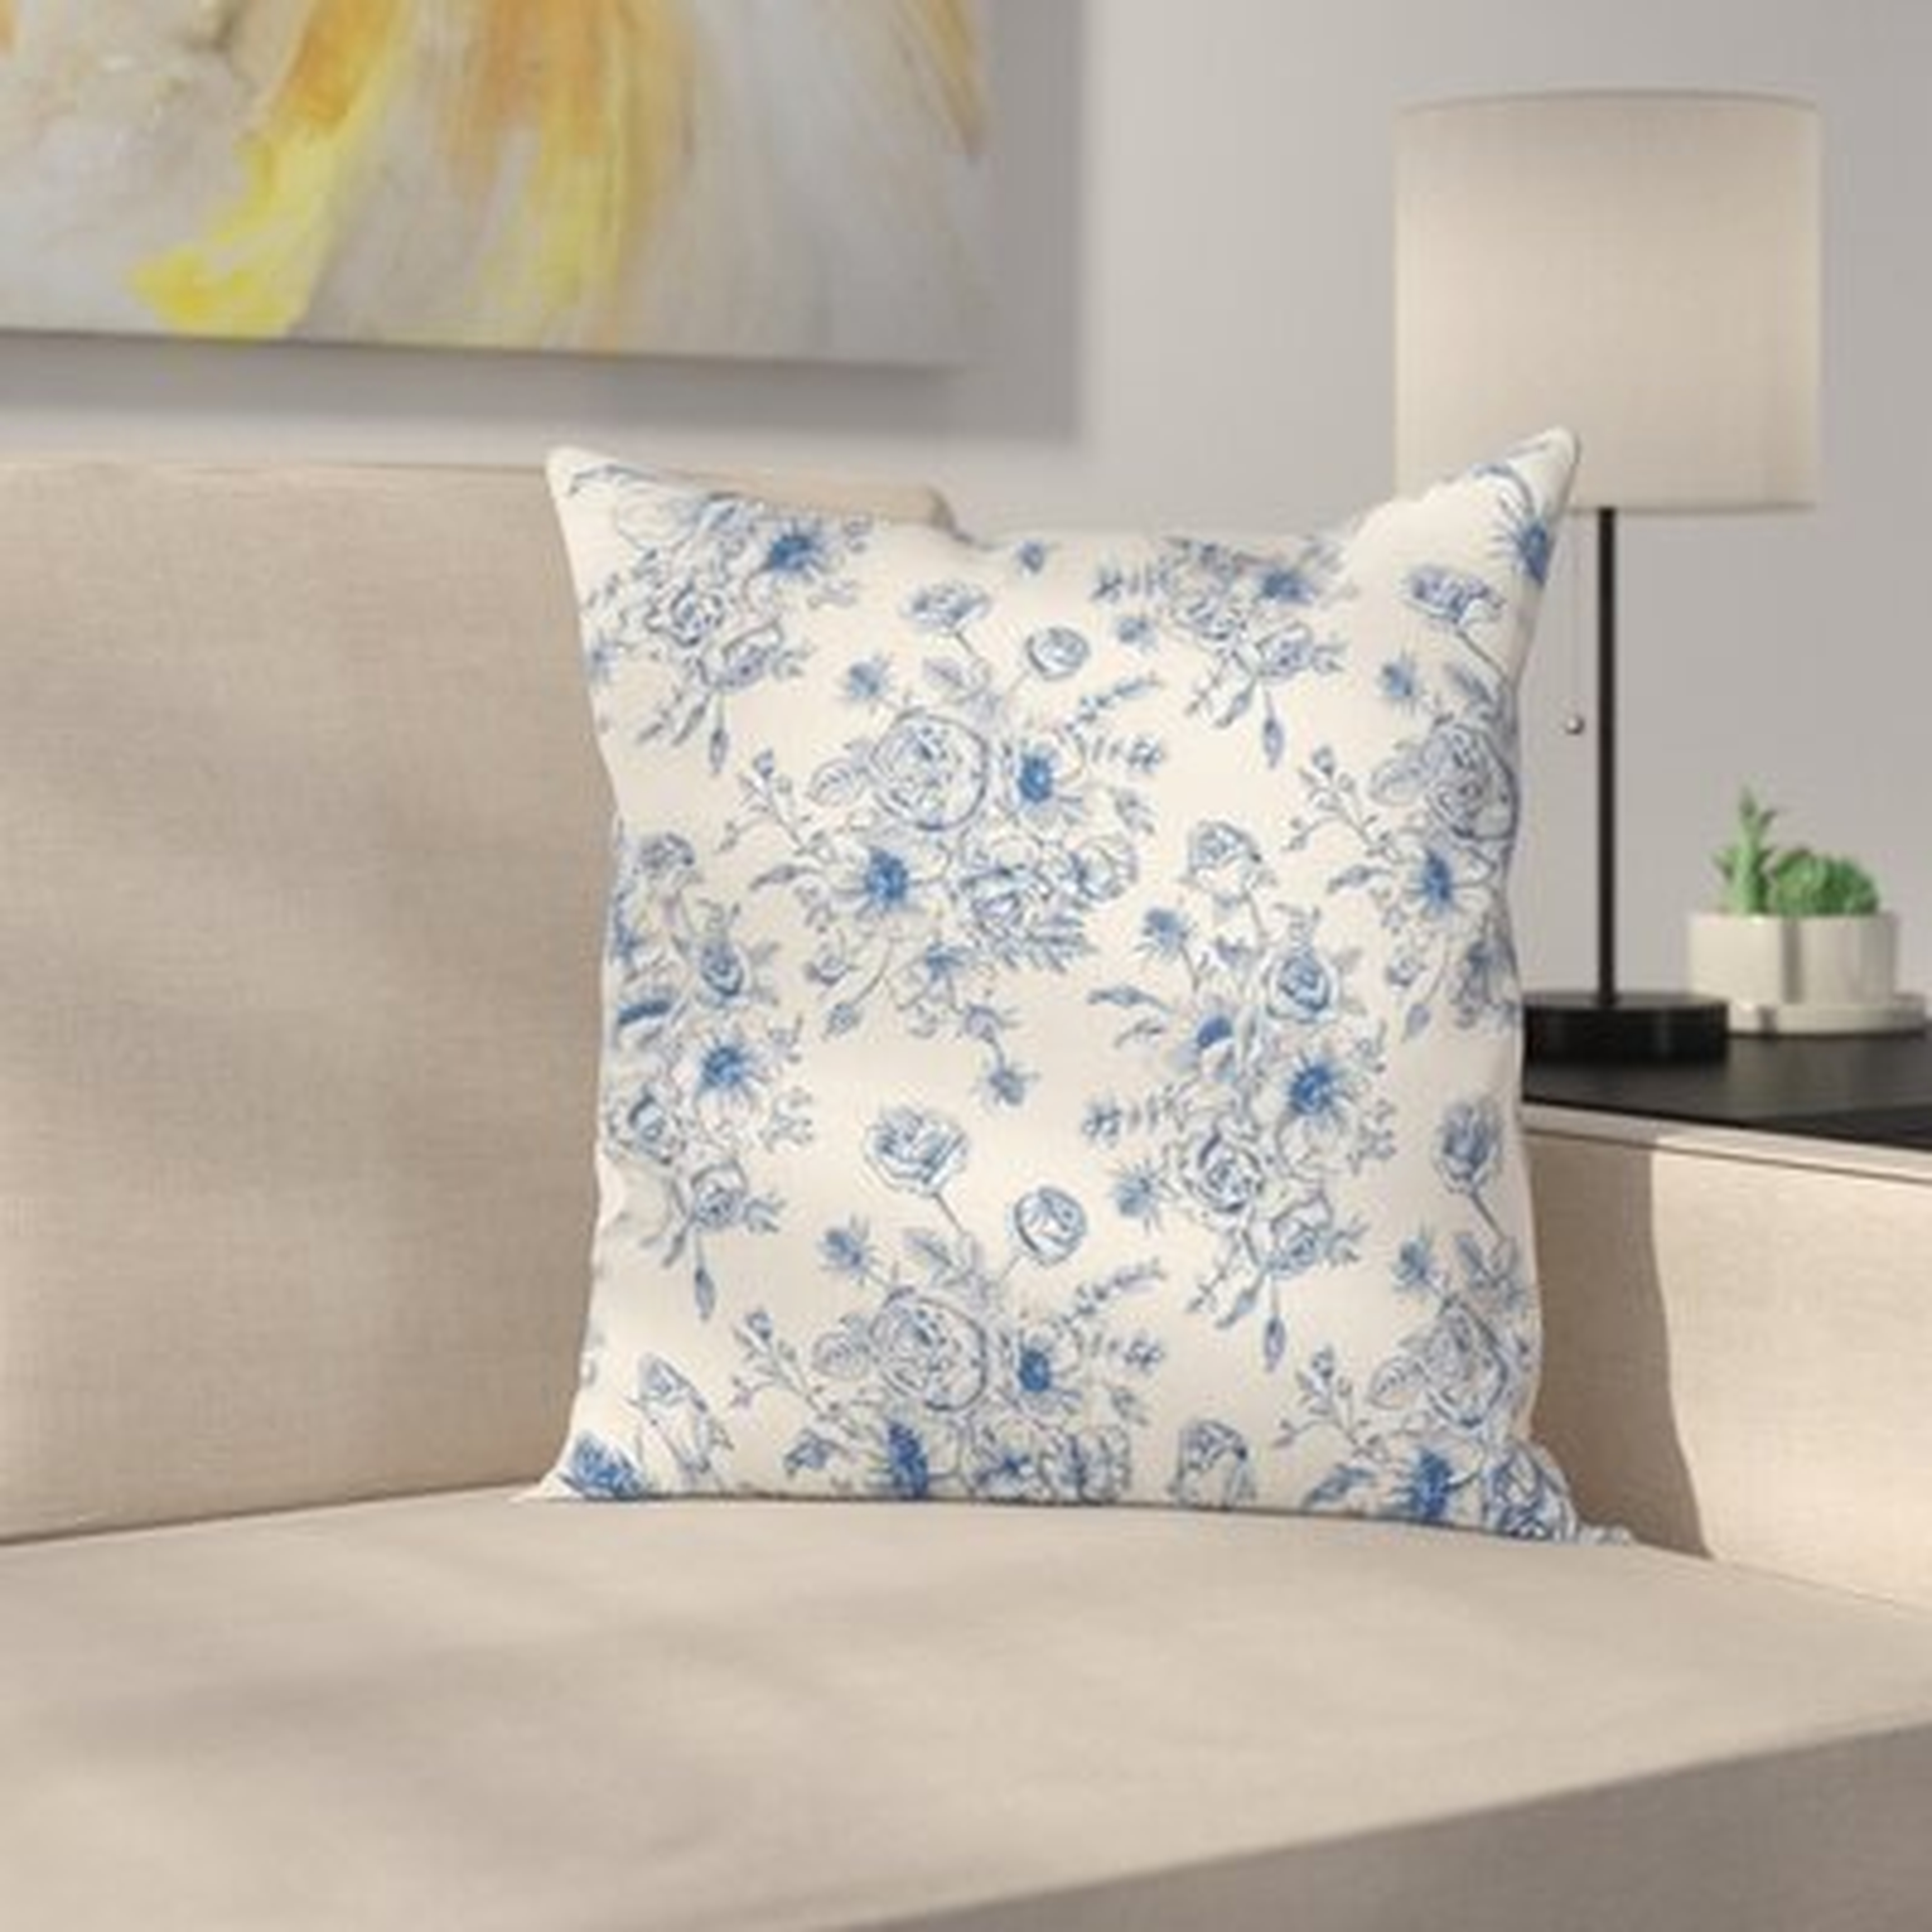 Anemone Victorian Floral Square Cushion Pillow Cover - Wayfair